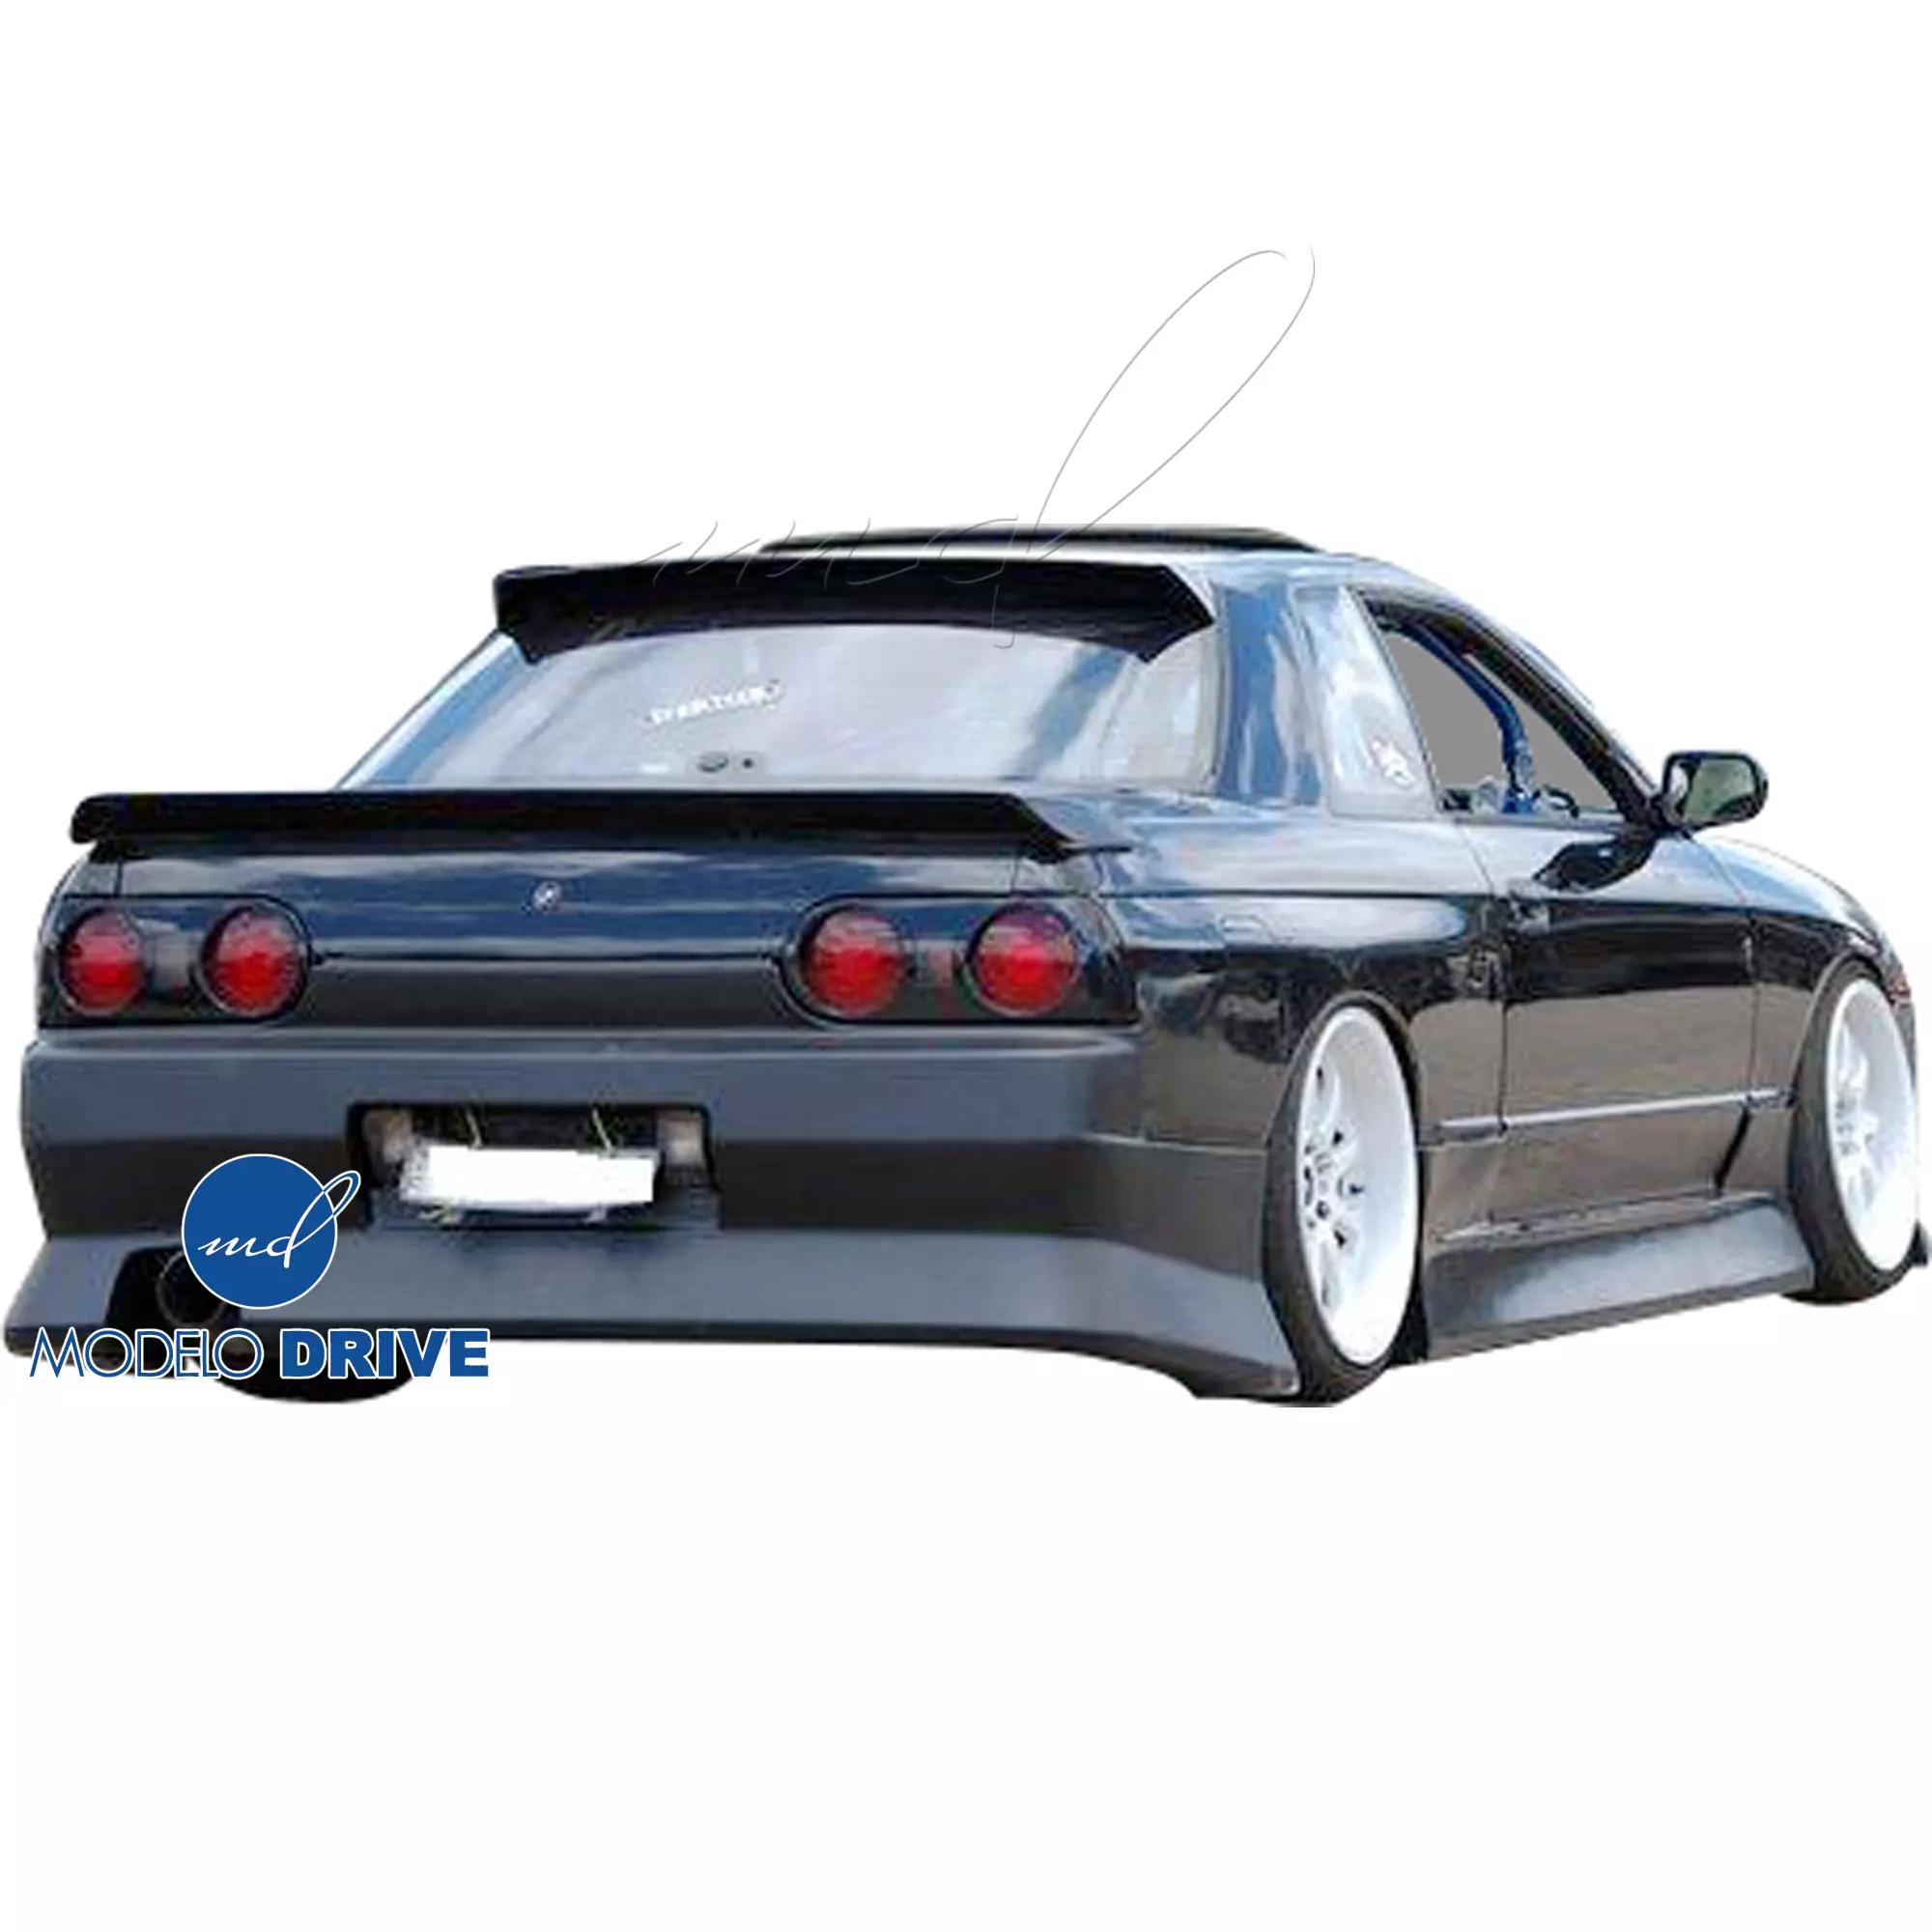 ModeloDrive FRP DMA Trunk Spoiler Wing > Nissan Skyline R32 1990-1994 > 2dr Coupe - Image 10